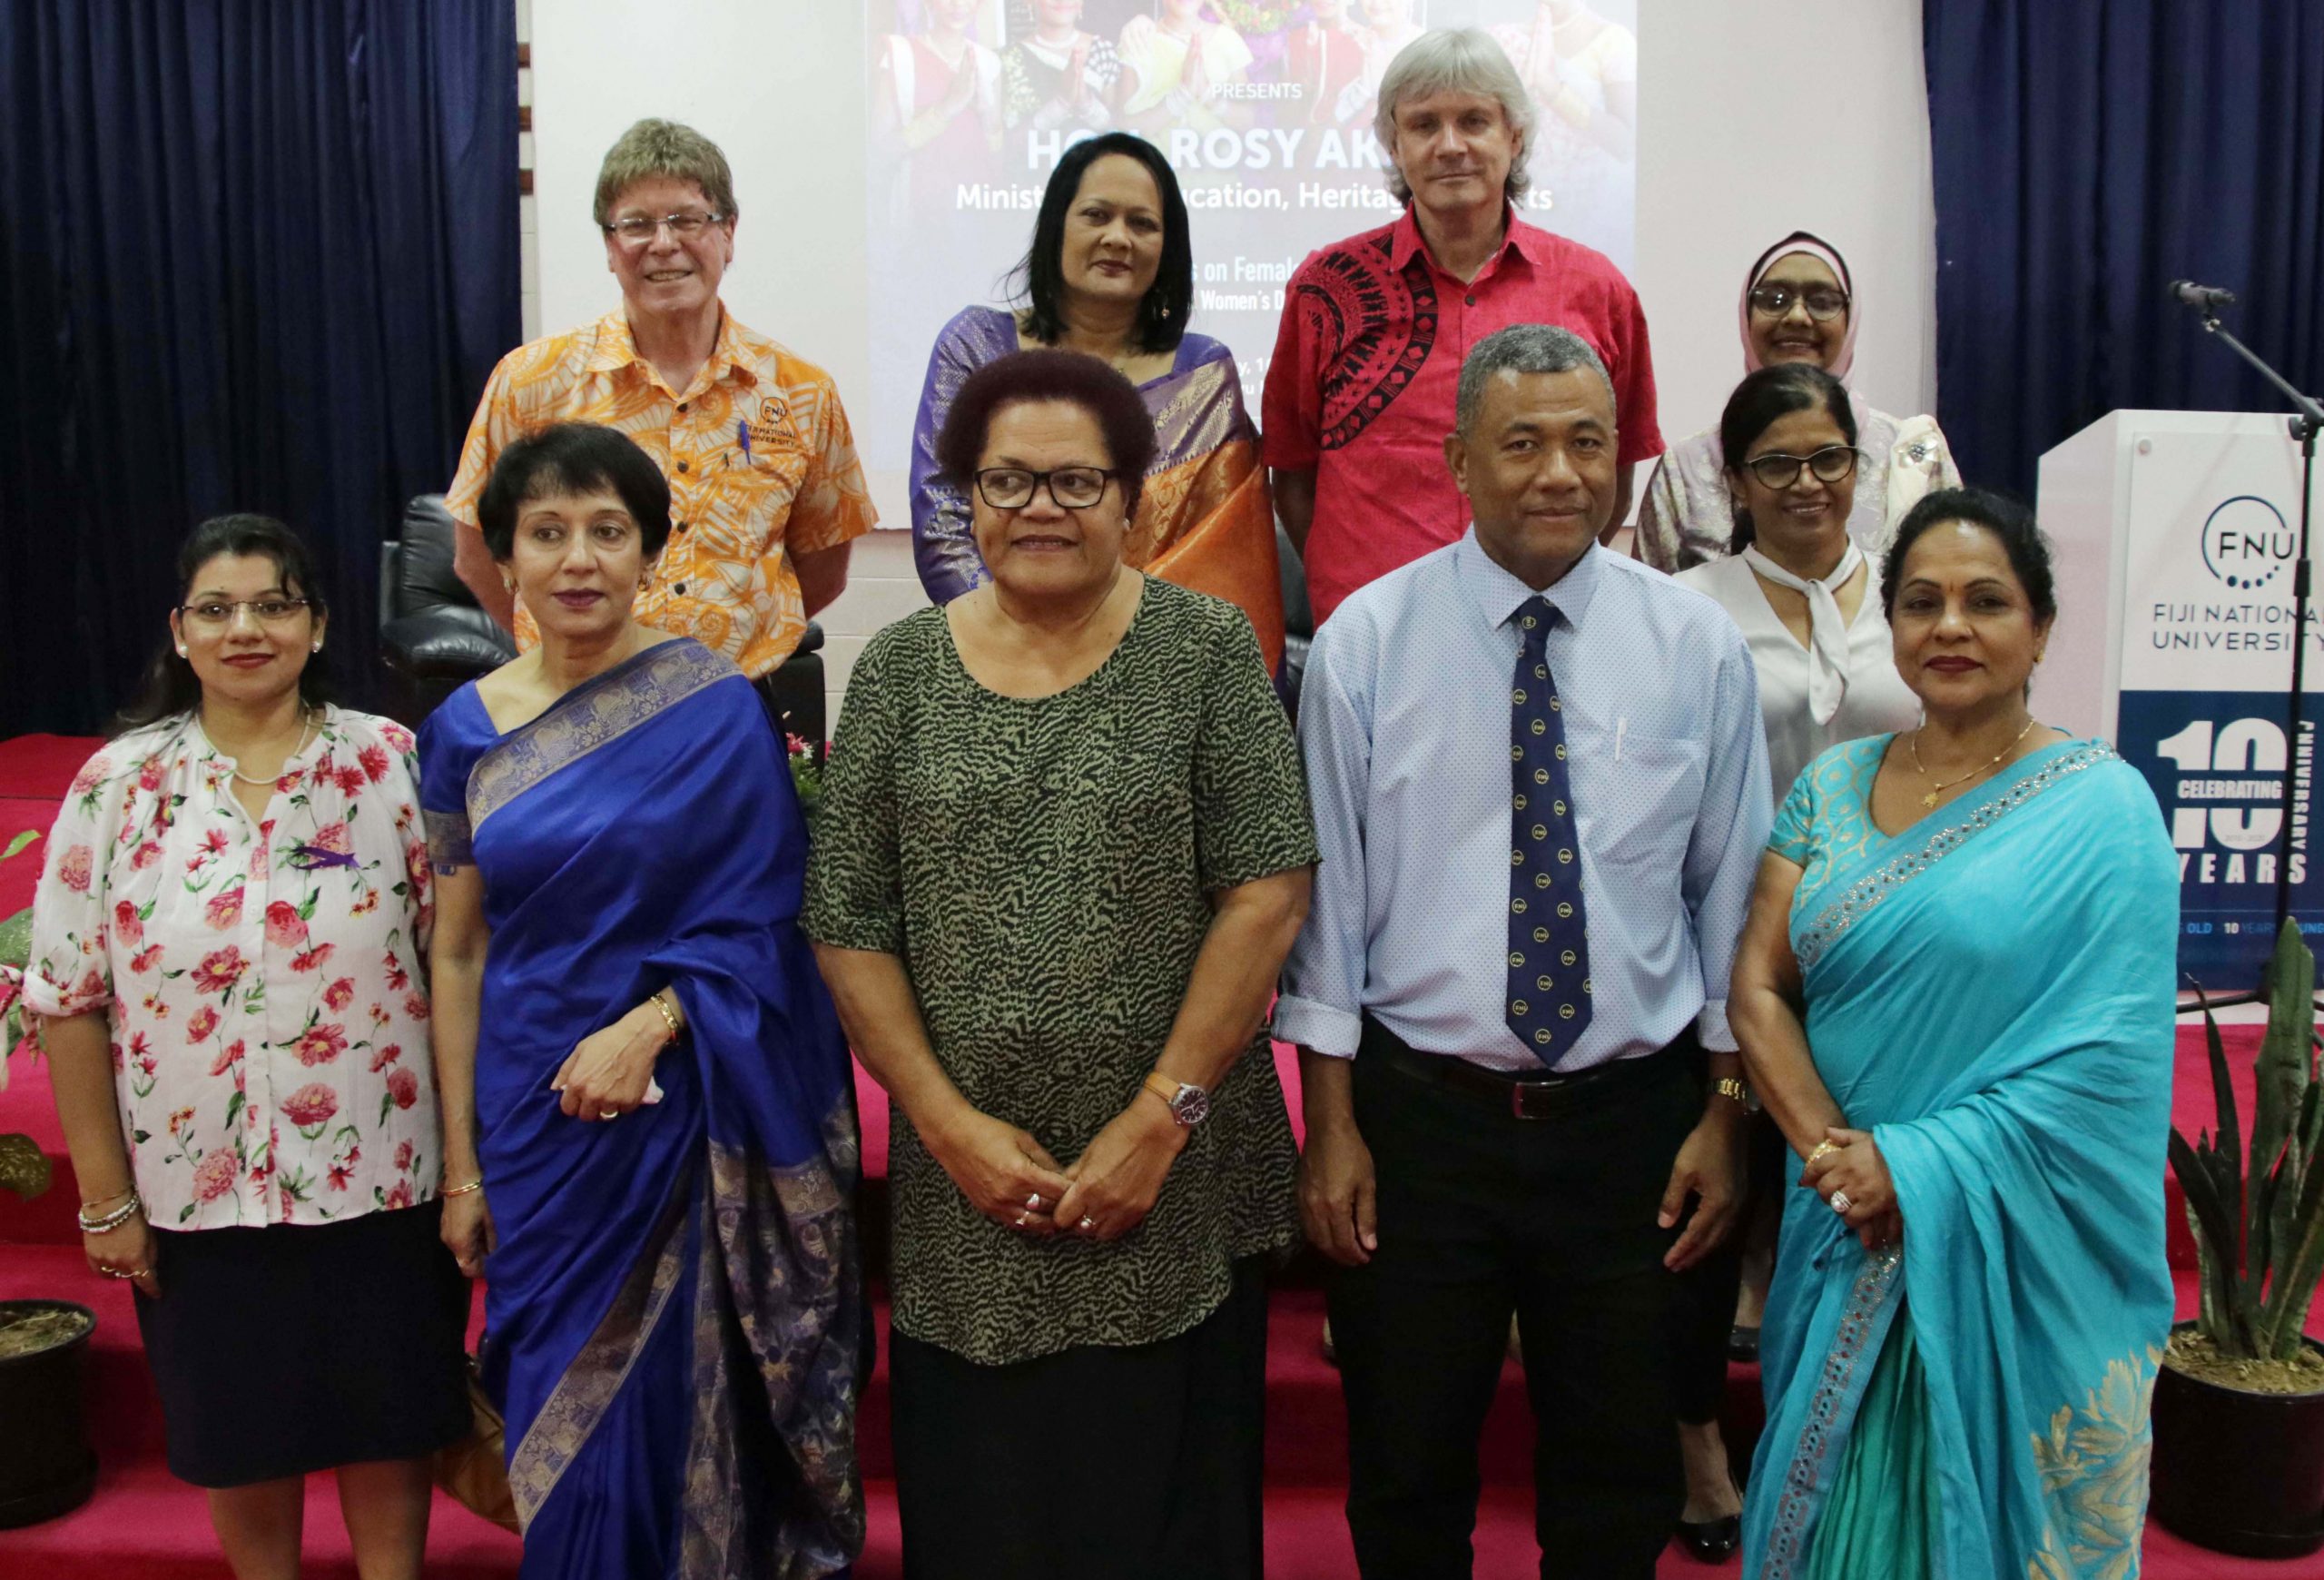 The Minister for Education, Heritage and Arts, Honourable Rosy Akbar with staff of FNU at Nasinu Campus